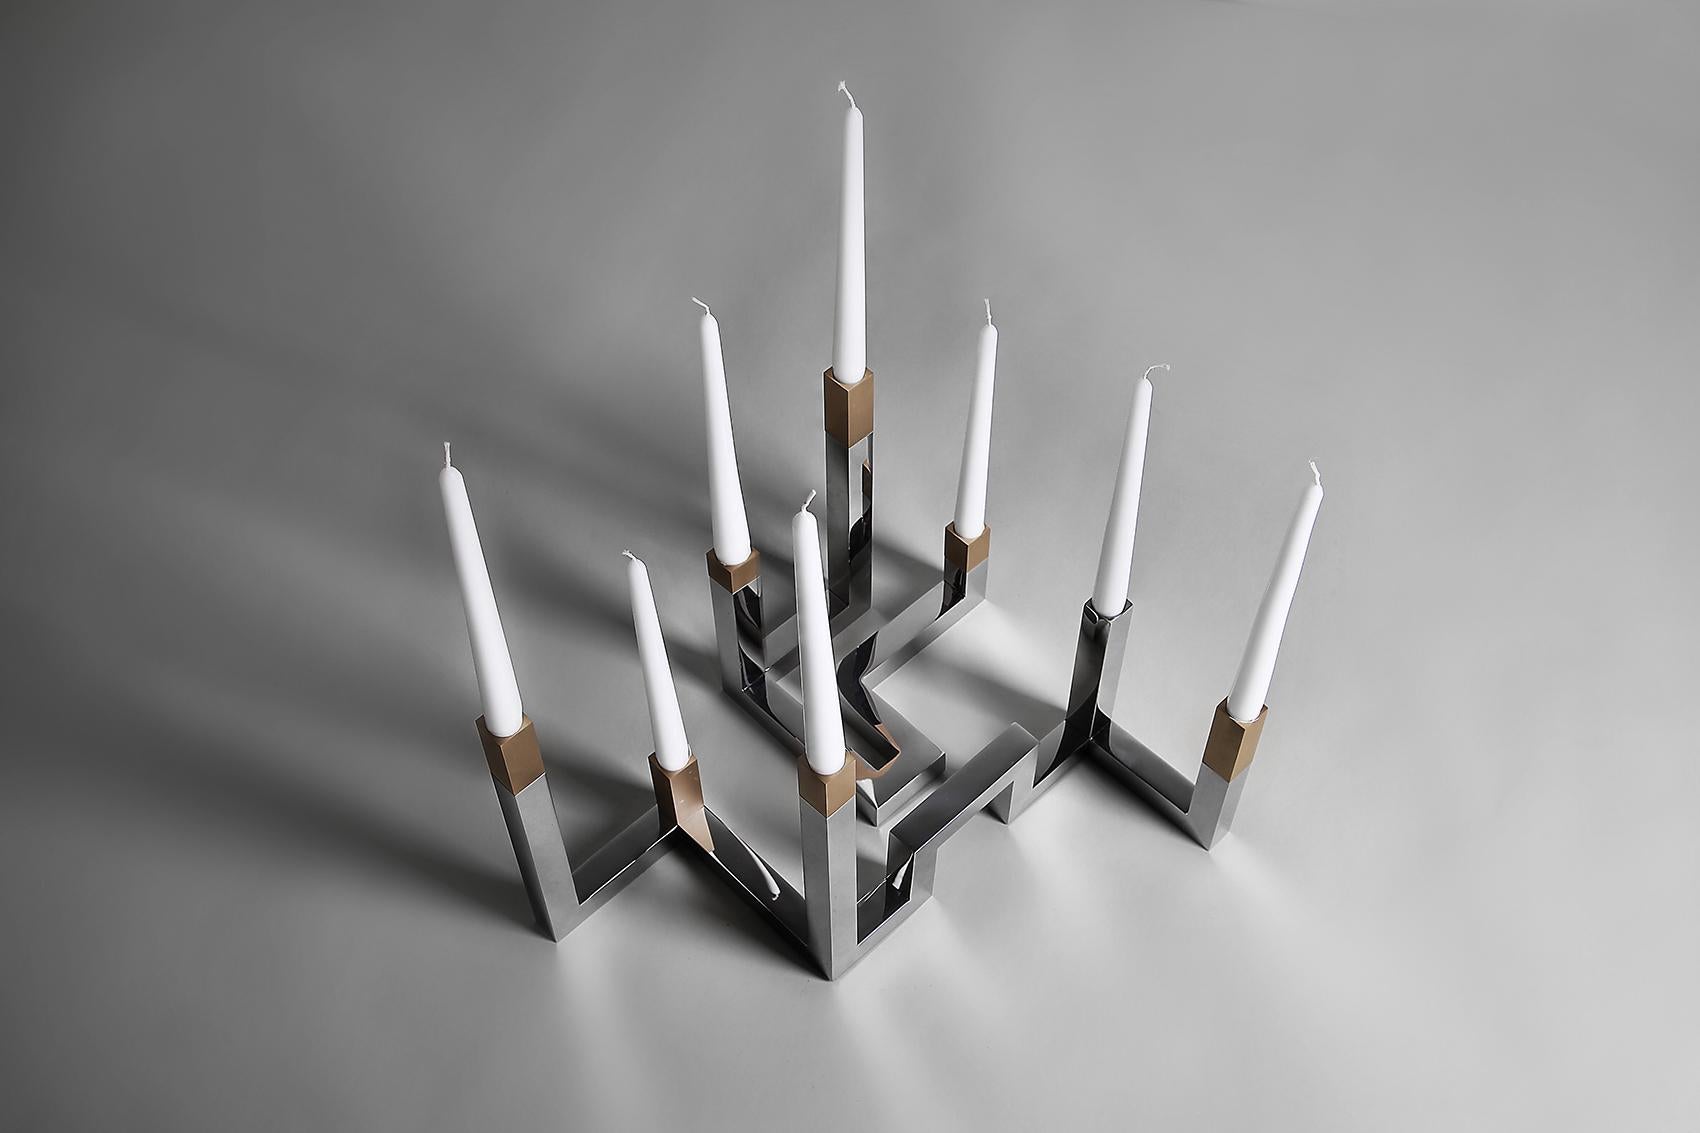 Inspired by the Tetra Line, this small candle holder can be joined with a large one (TETRA - CL) dynamically, allowing many combinations to fit the setting.
Made of Polished stainless steel with brushed light oxidized brass.
Note that the picture